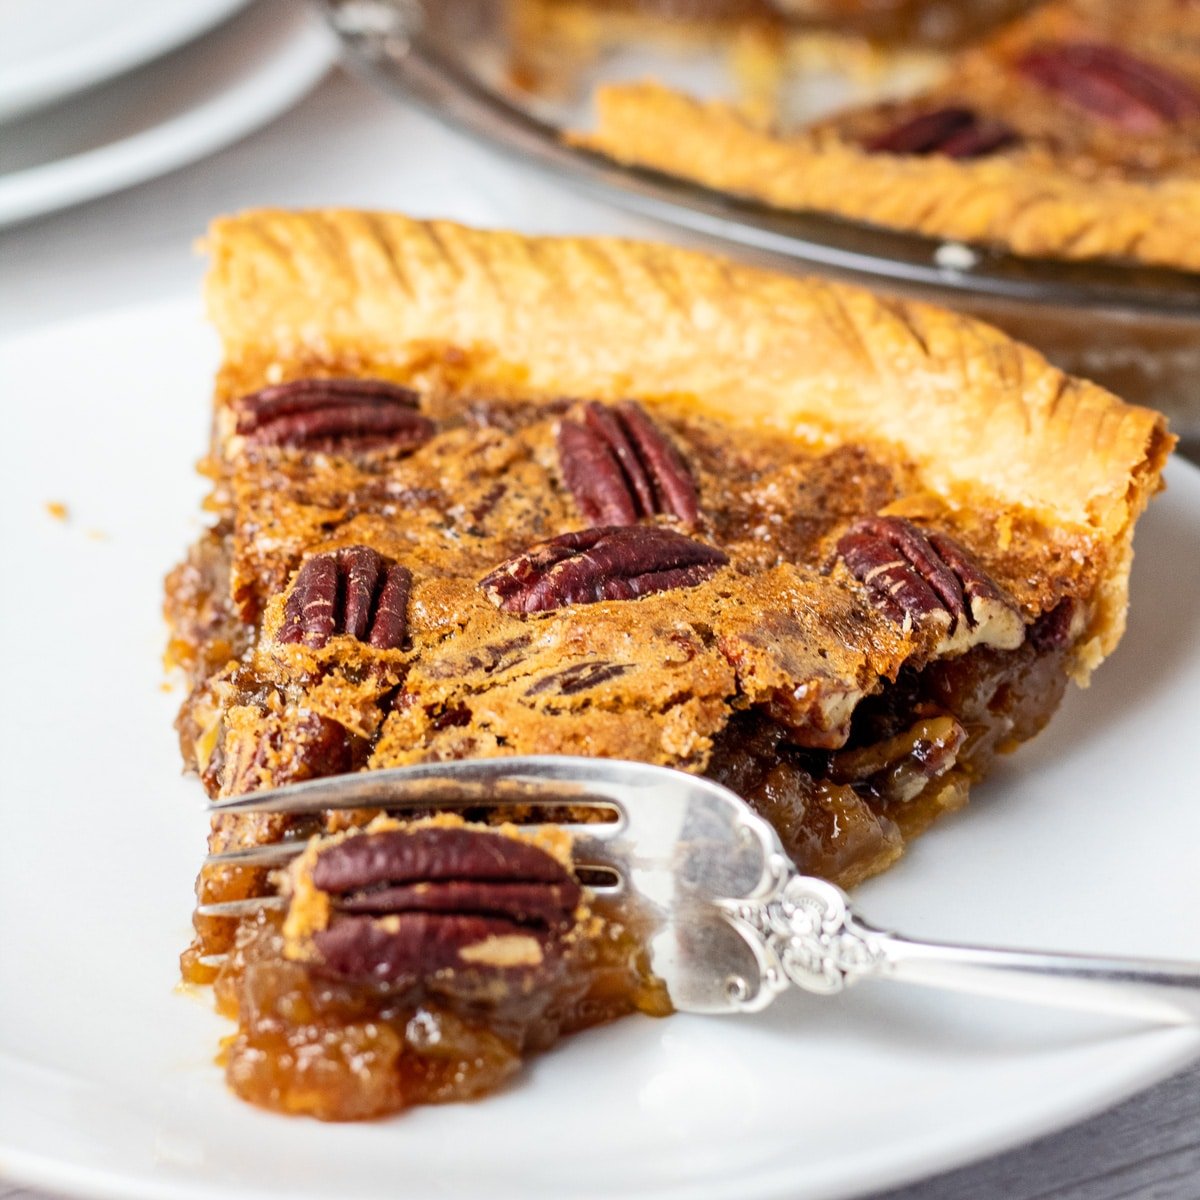 How to freeze pecan pie either whole or sliced leftovers after the holidays.